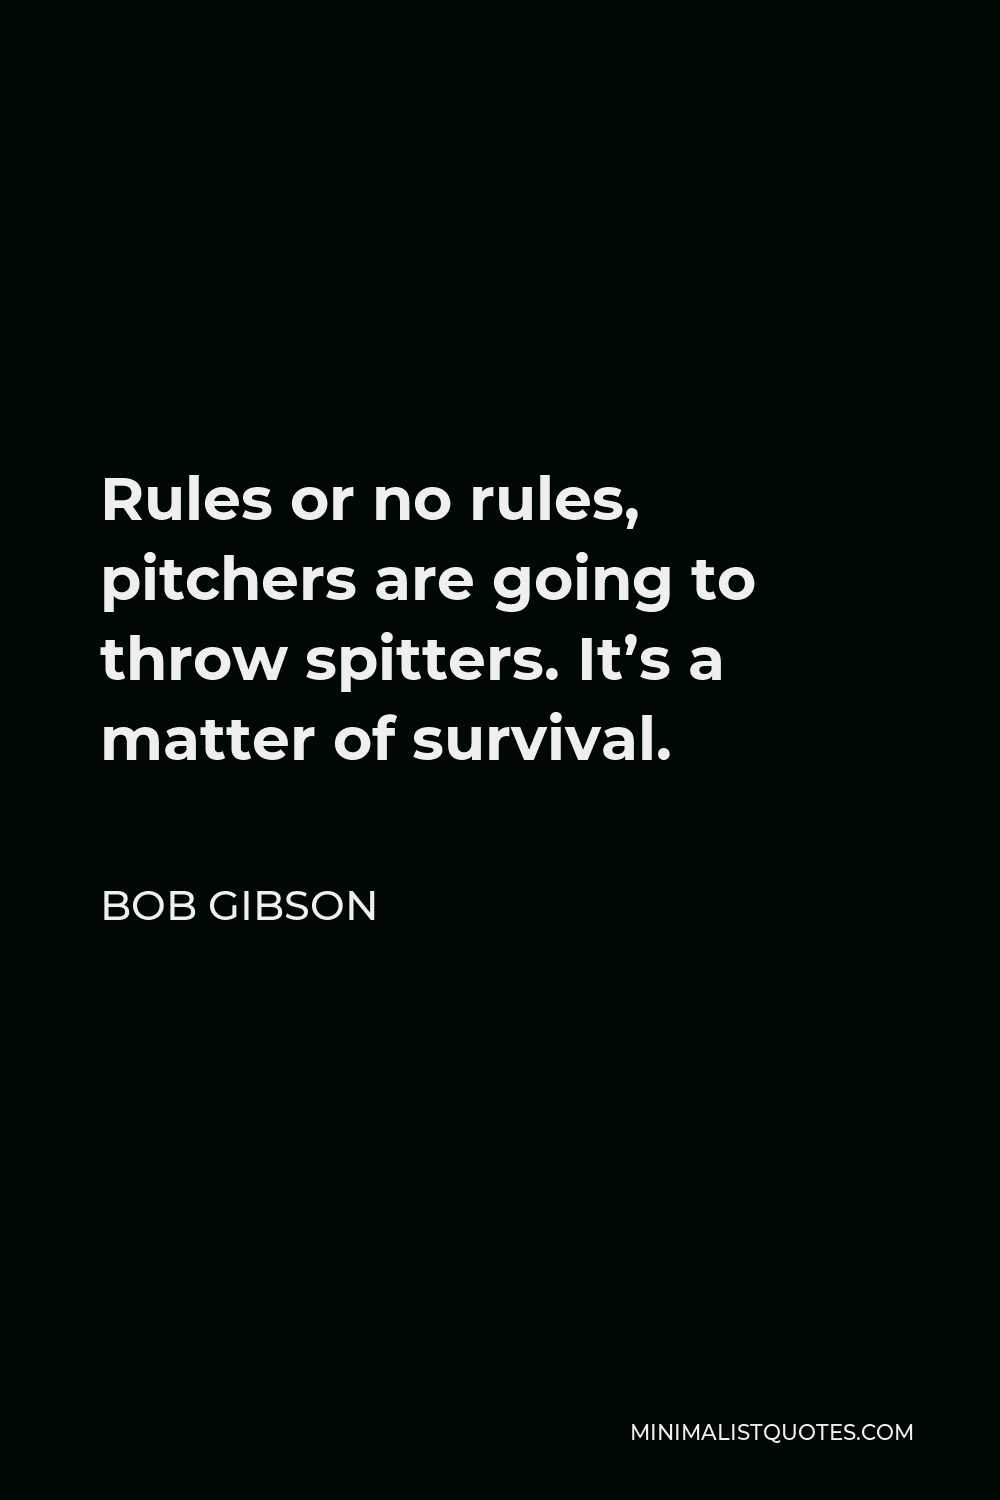 Bob Gibson Quote - Rules or no rules, pitchers are going to throw spitters. It’s a matter of survival.